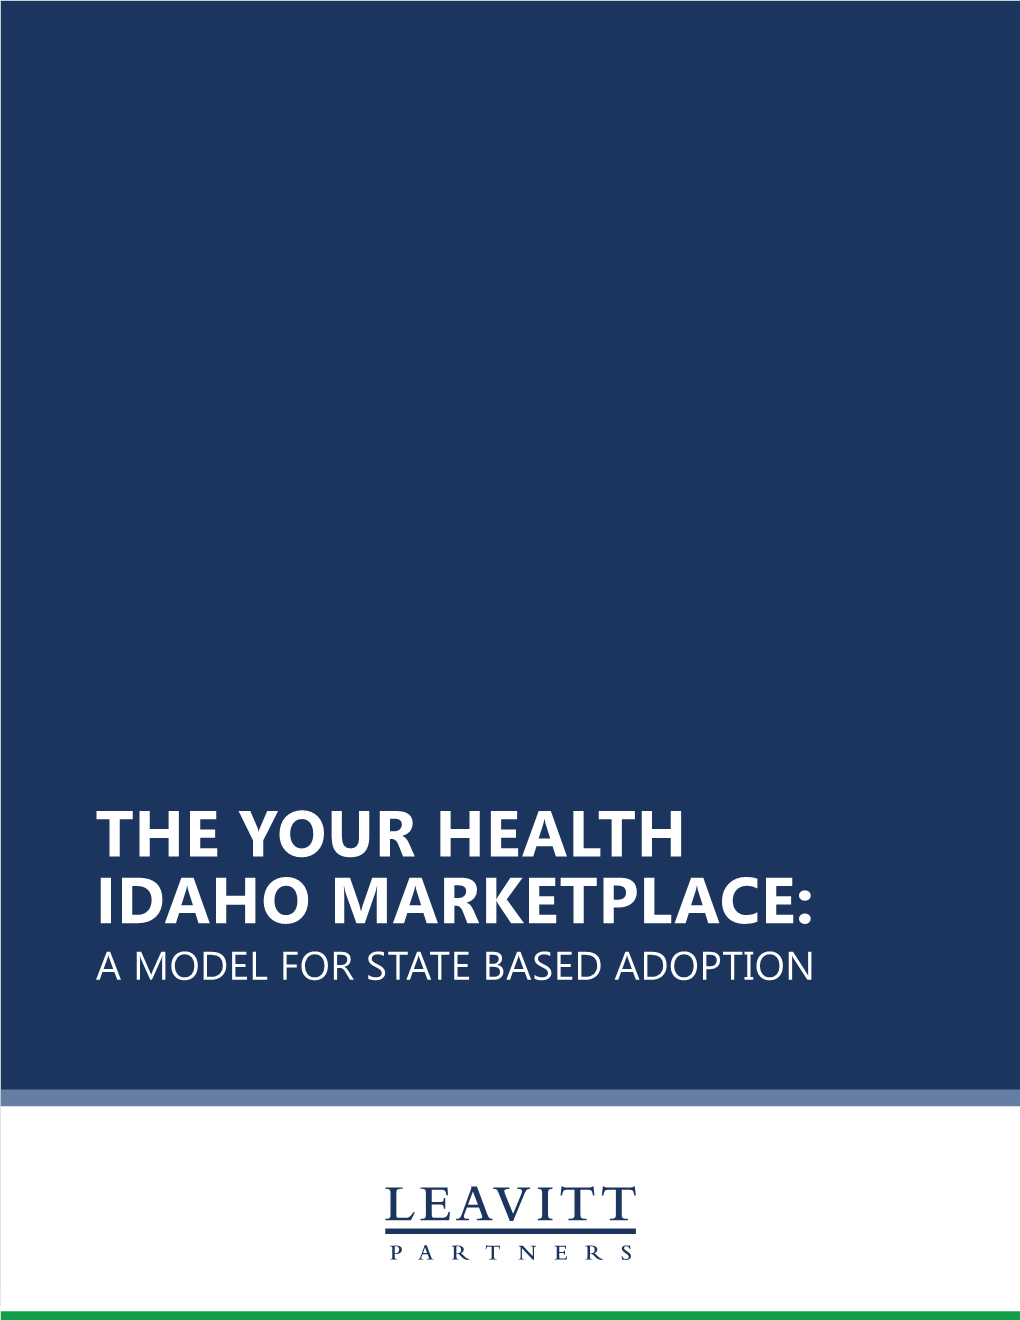 The Your Health Idaho Marketplace: a Model for State-Based Adoption